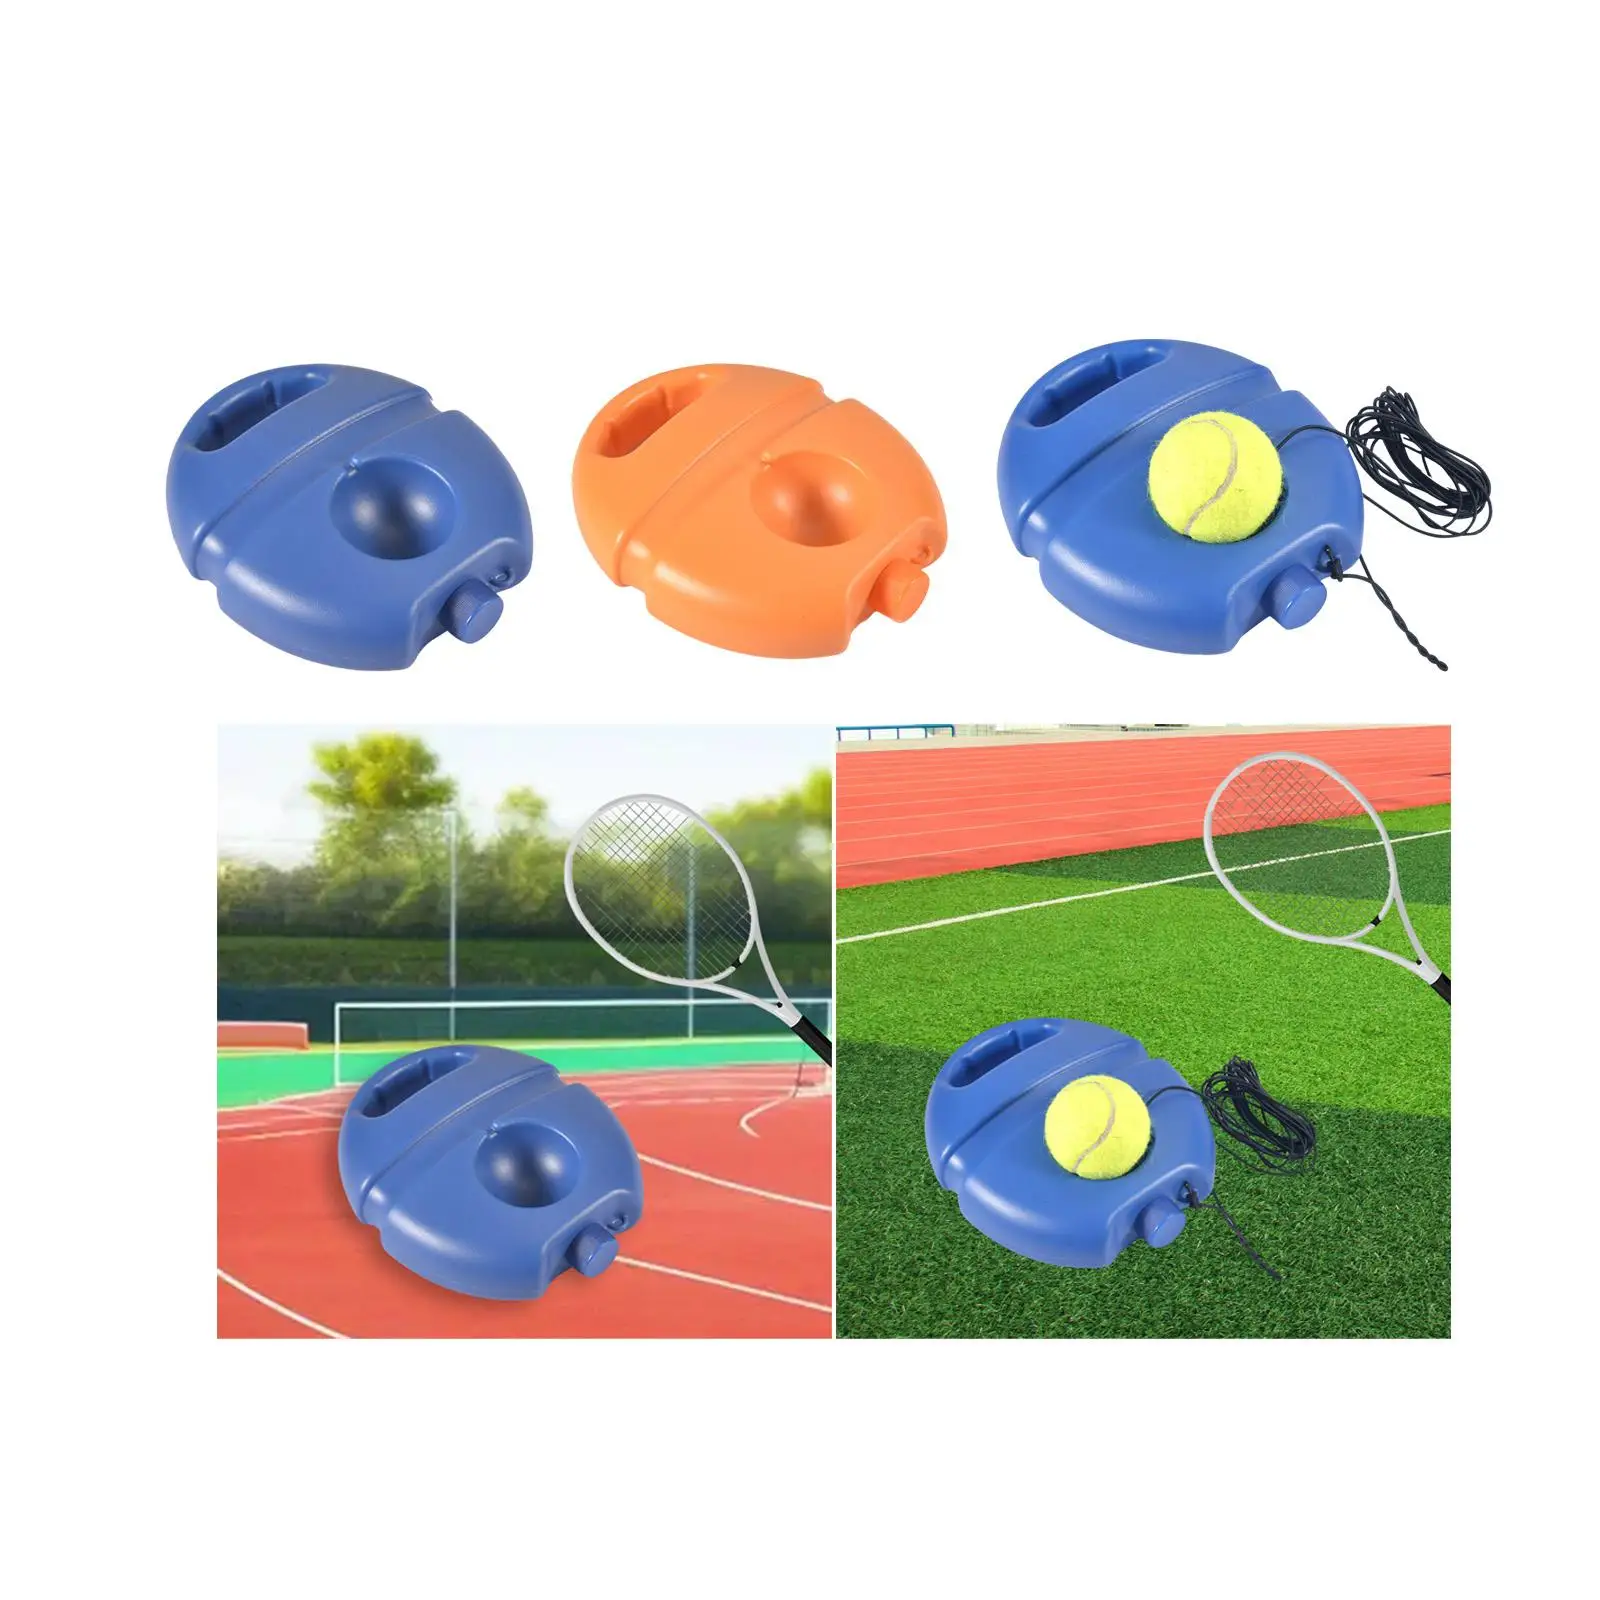 Tennis Trainer Base Portable Single Player Tennis Trainer for Outdoor Indoor